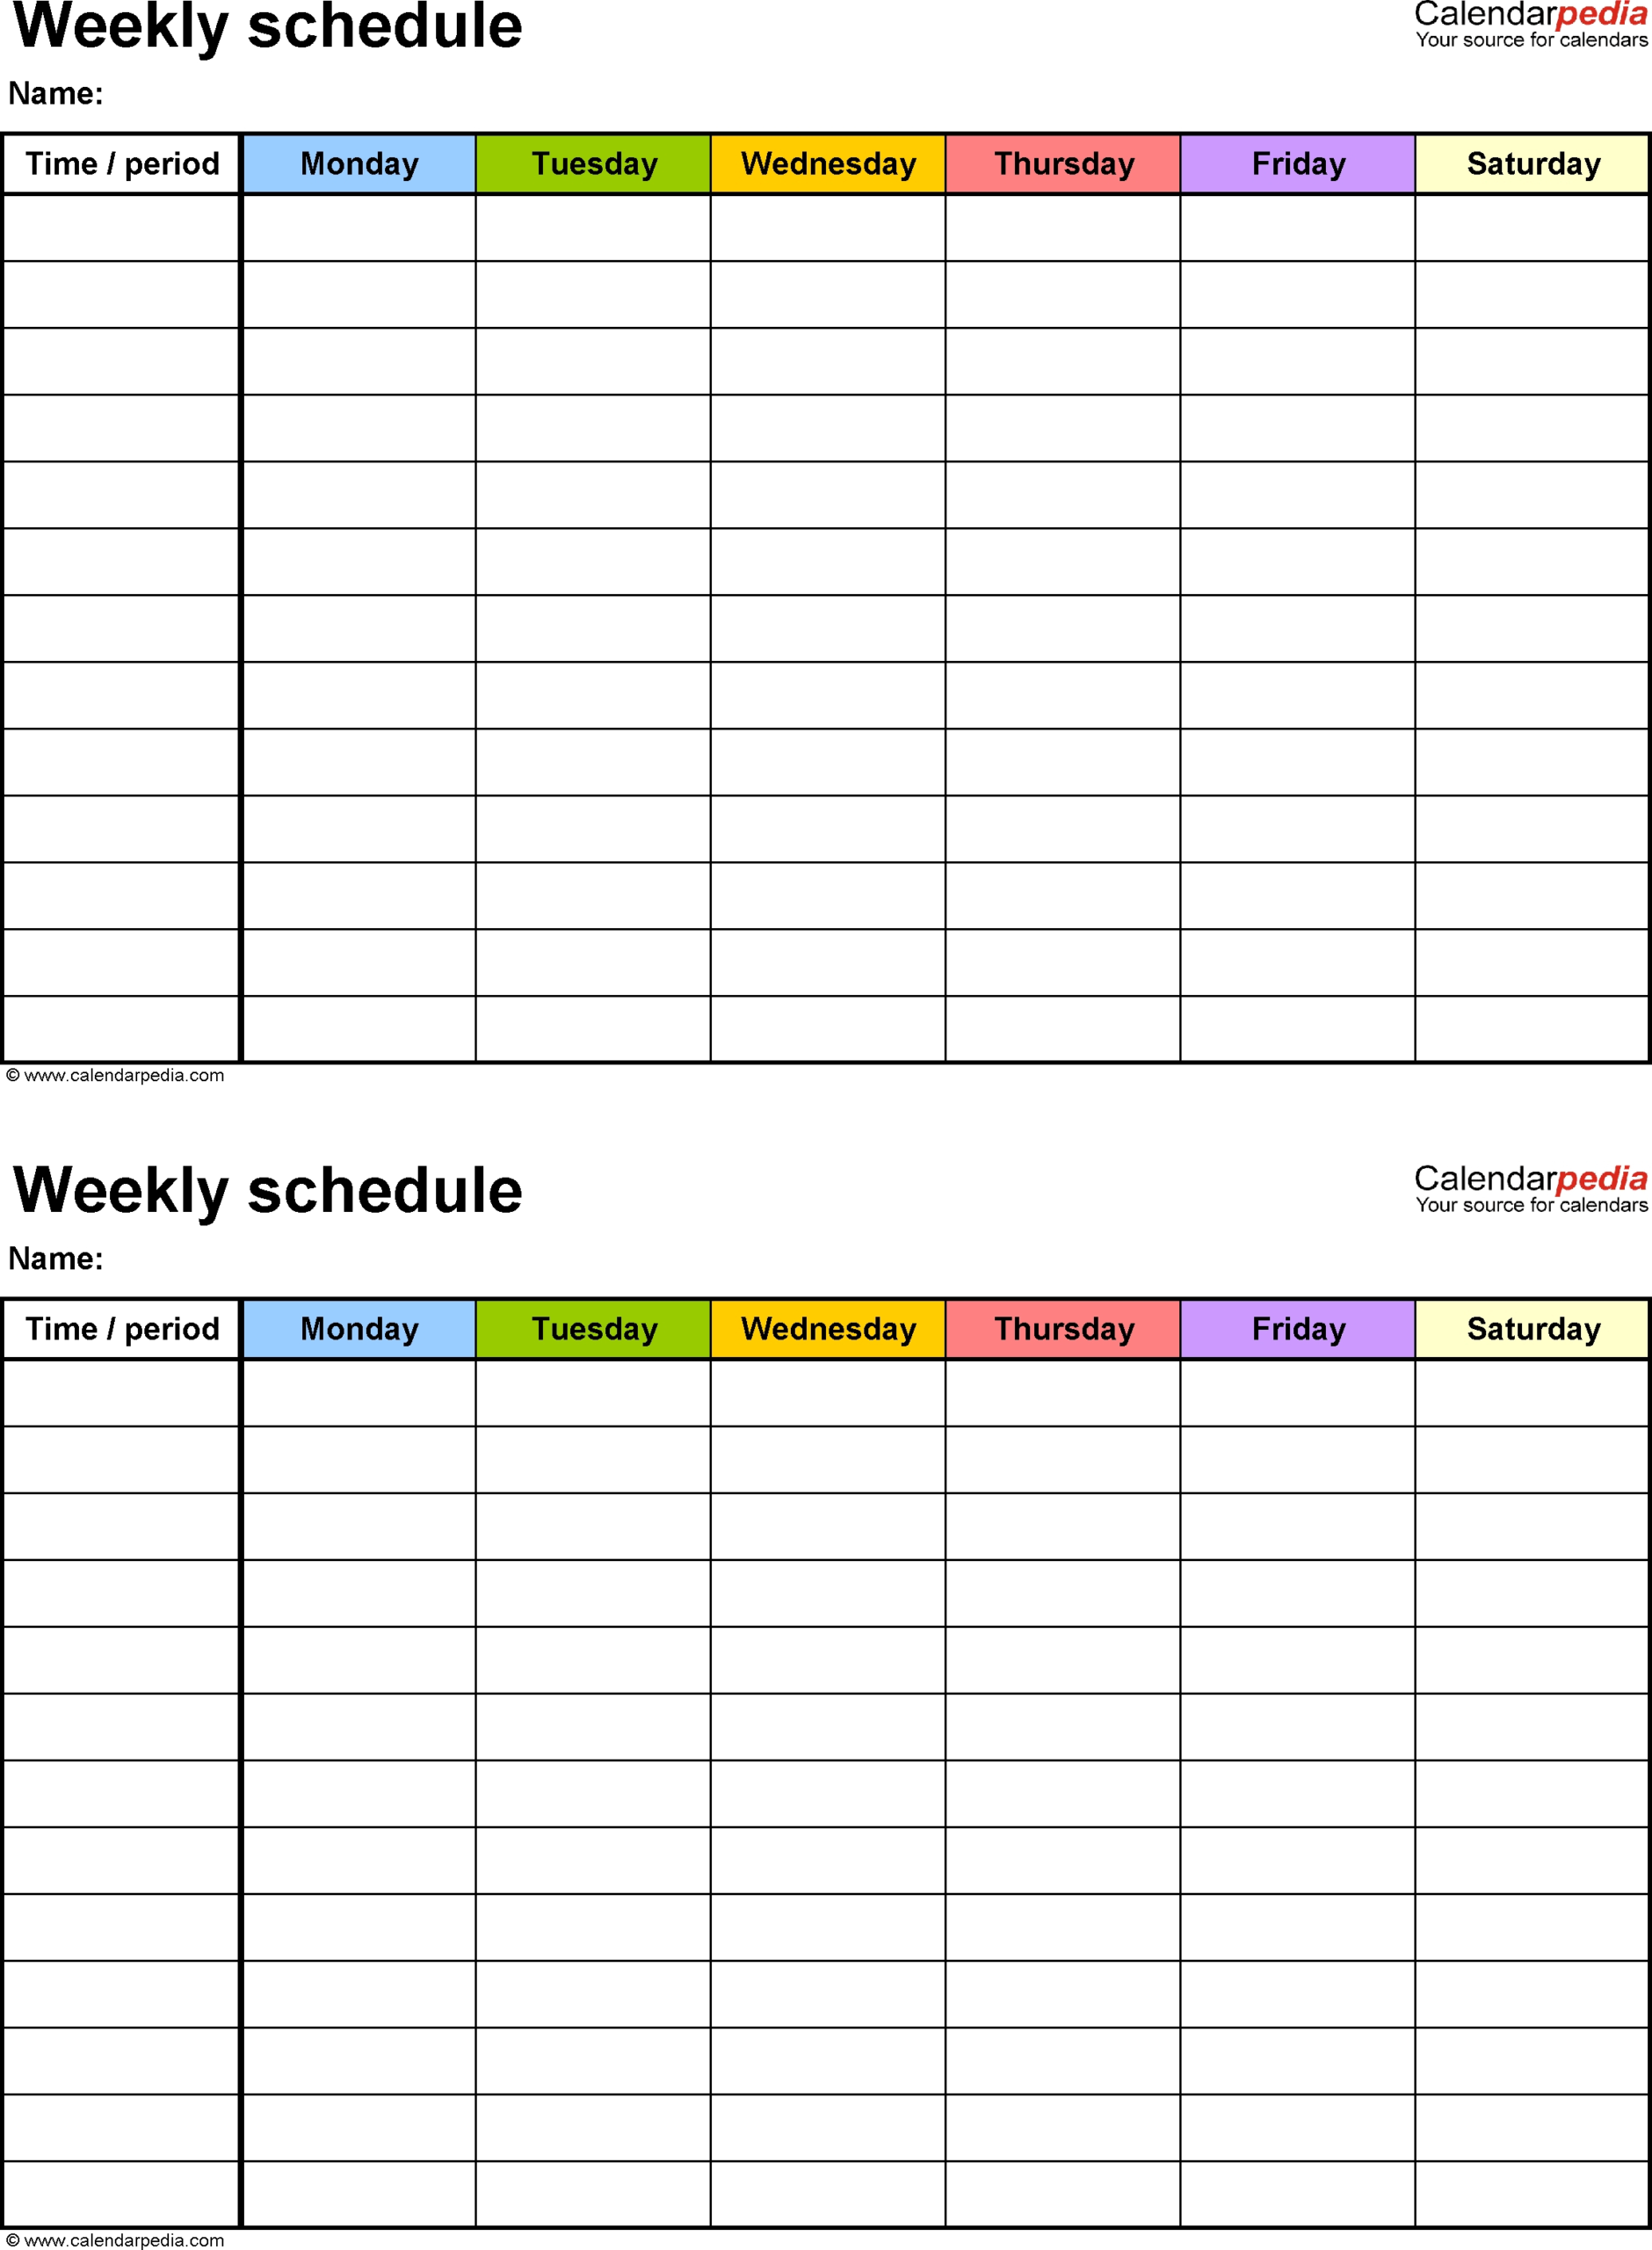 Summer Camp Schedule Template Editable | Calendar Template Printable inside Free Editable Calendar Templates Printable